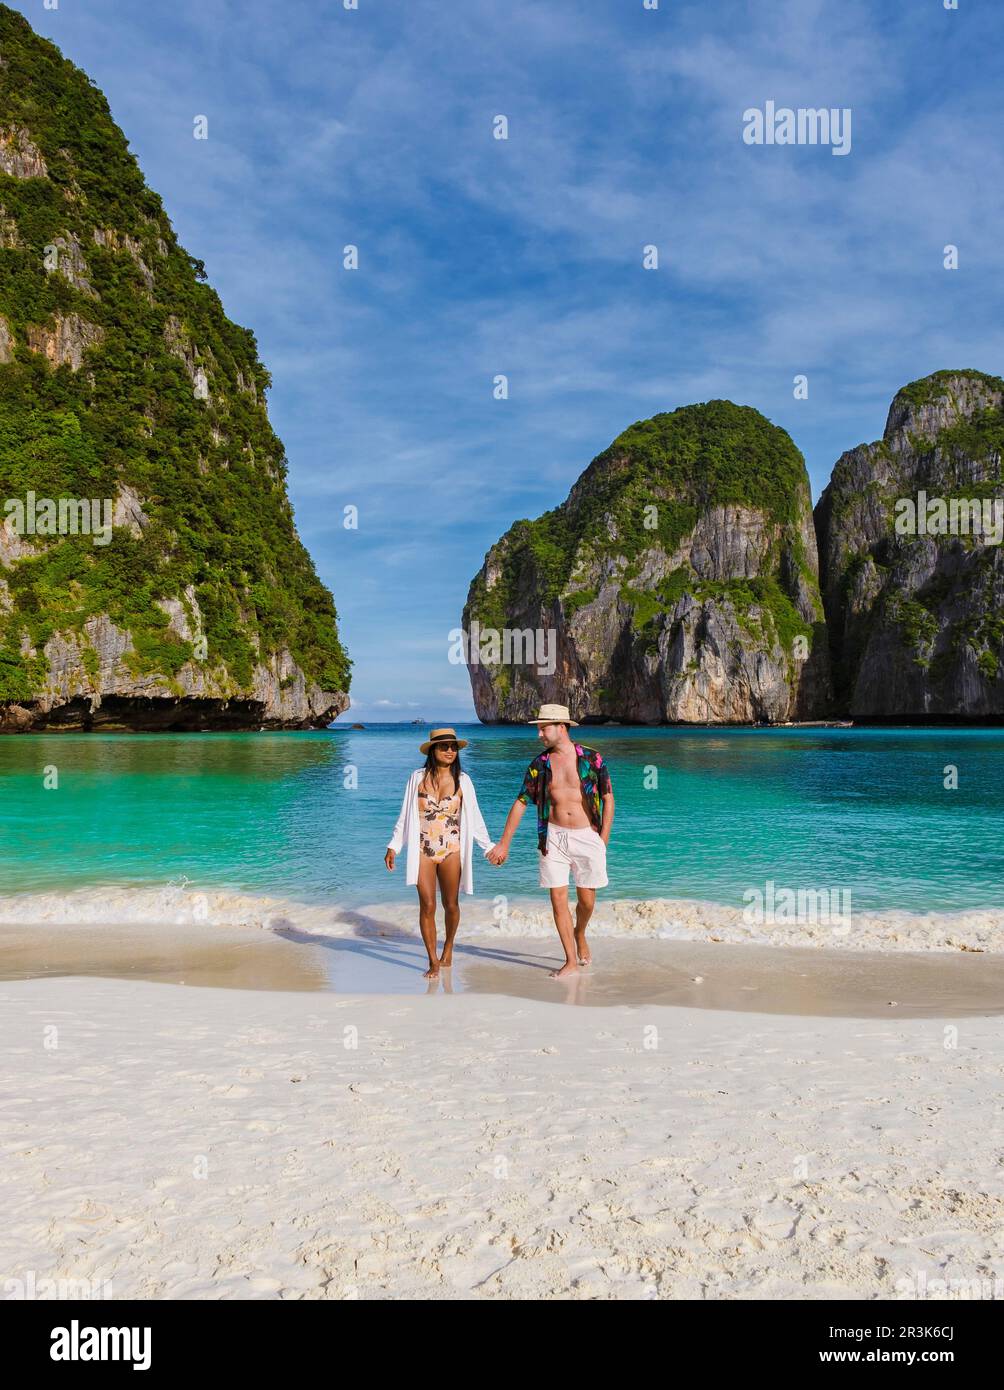 Maya Bay beach Koh Phi Phi Thailand in the morning with turqouse colored ocean Stock Photo